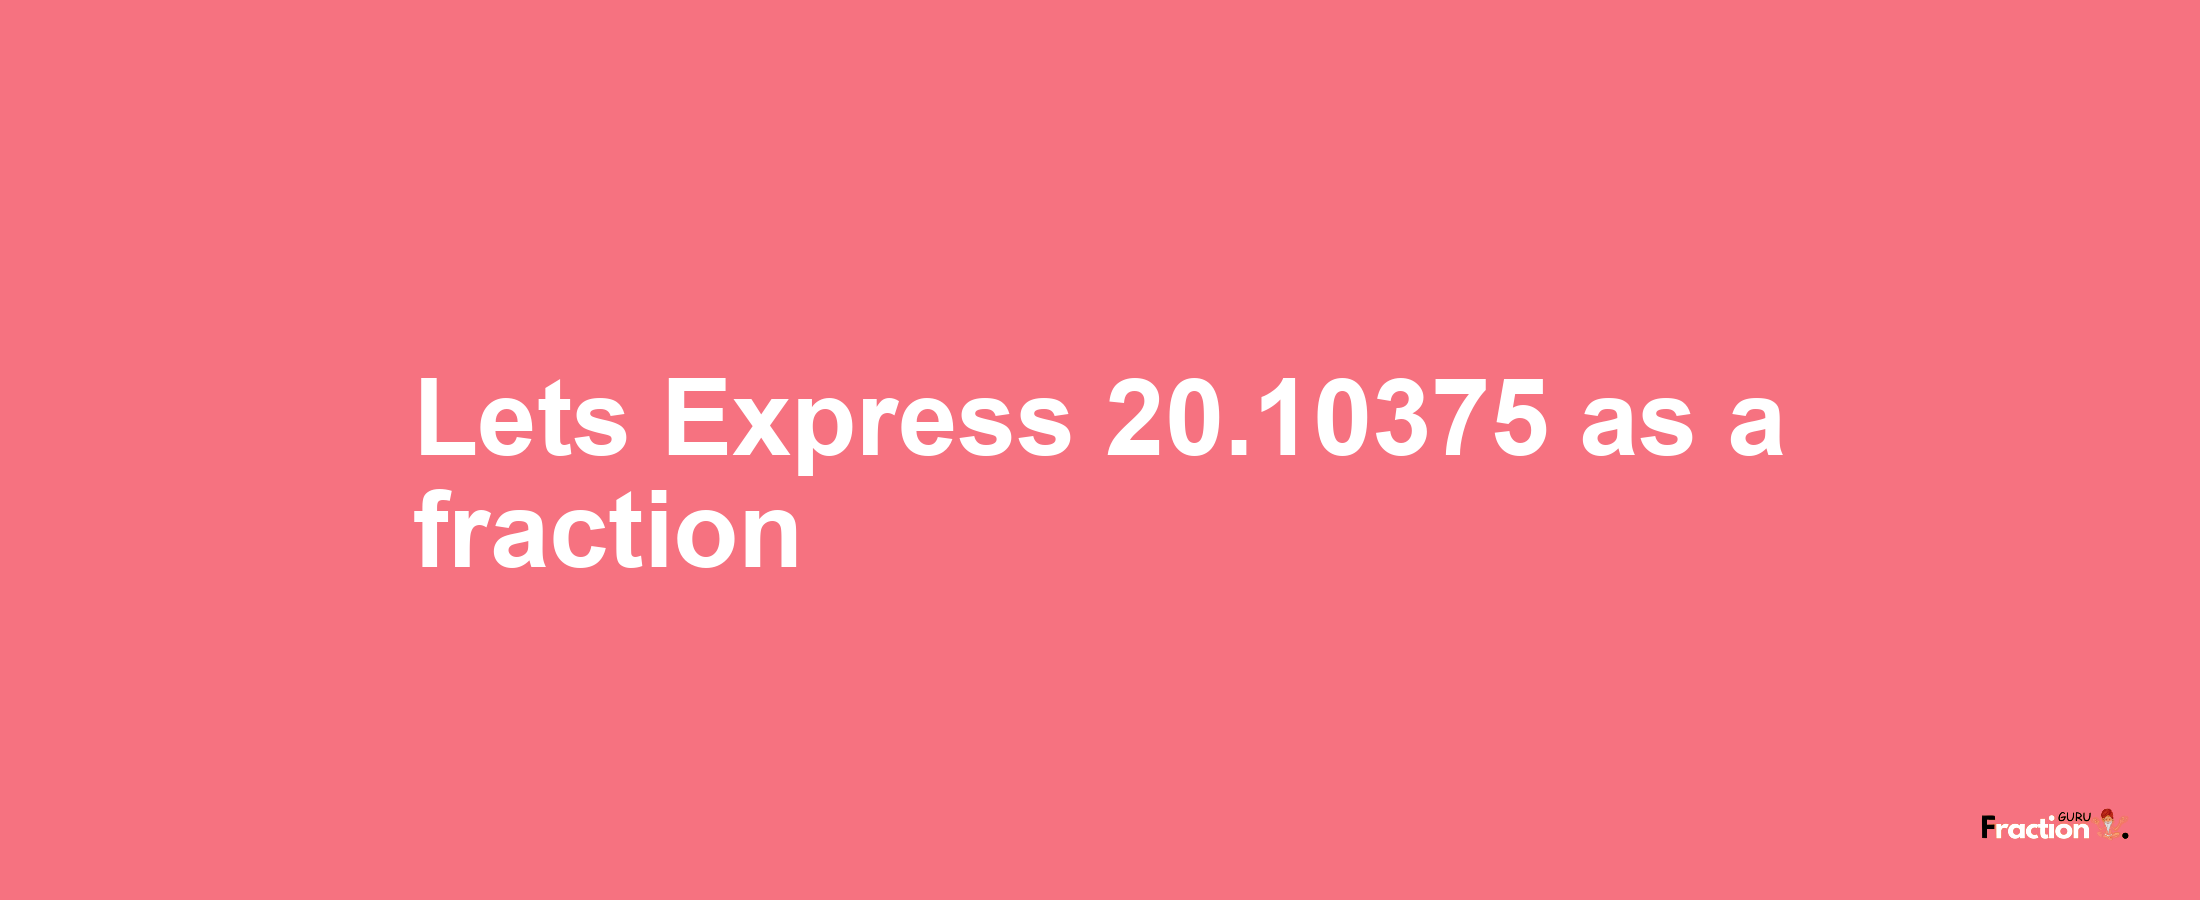 Lets Express 20.10375 as afraction